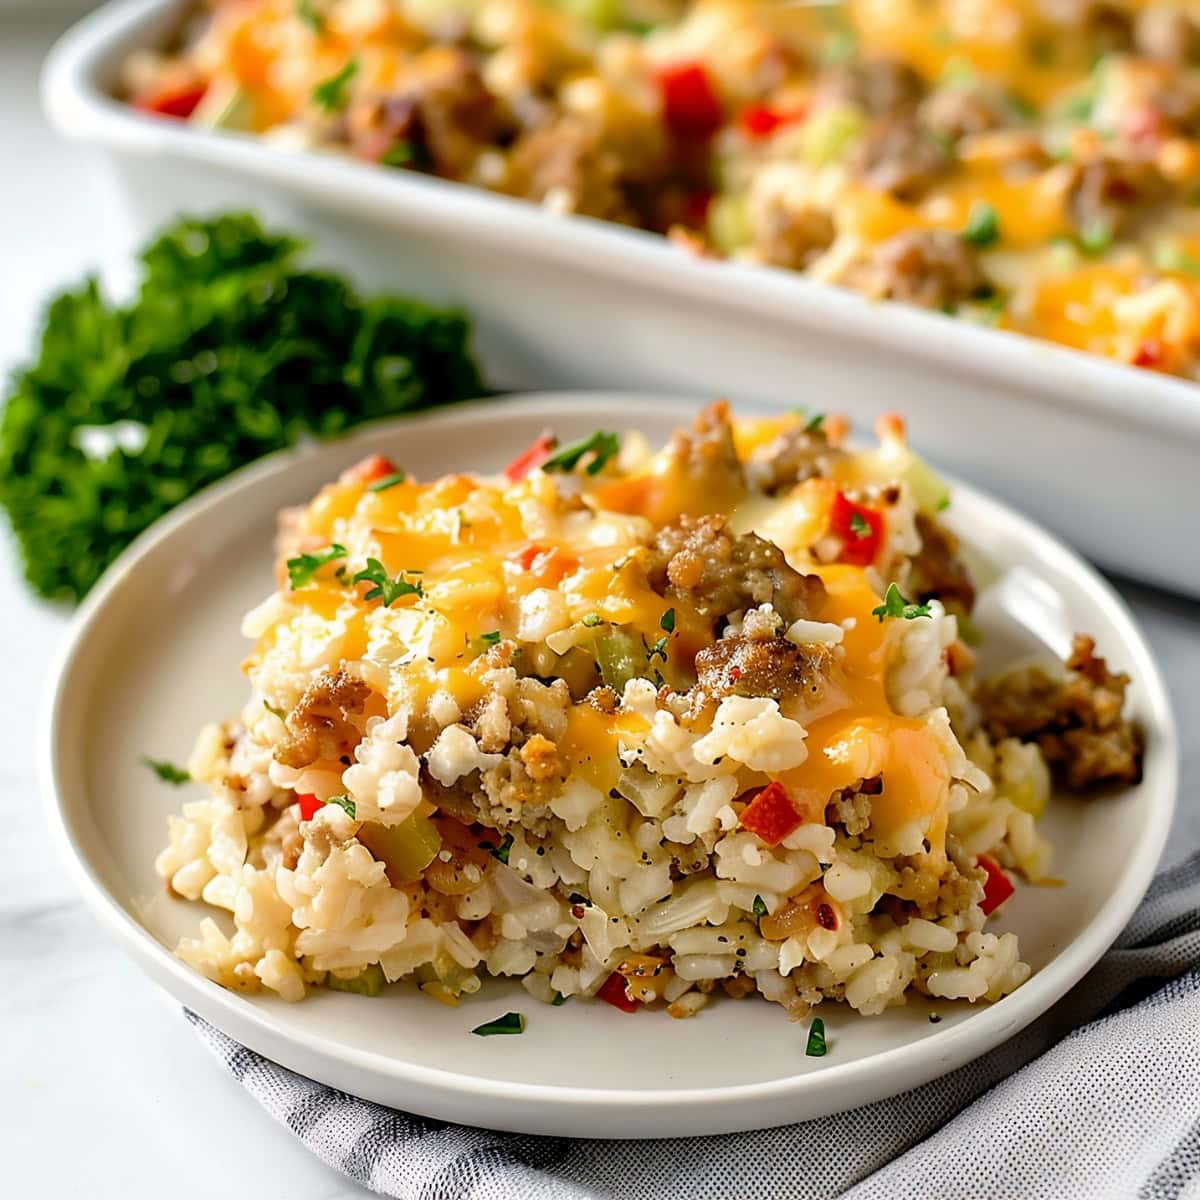 Meaty and cheesy homemade sausage and rice casserole with bell peppers and celery